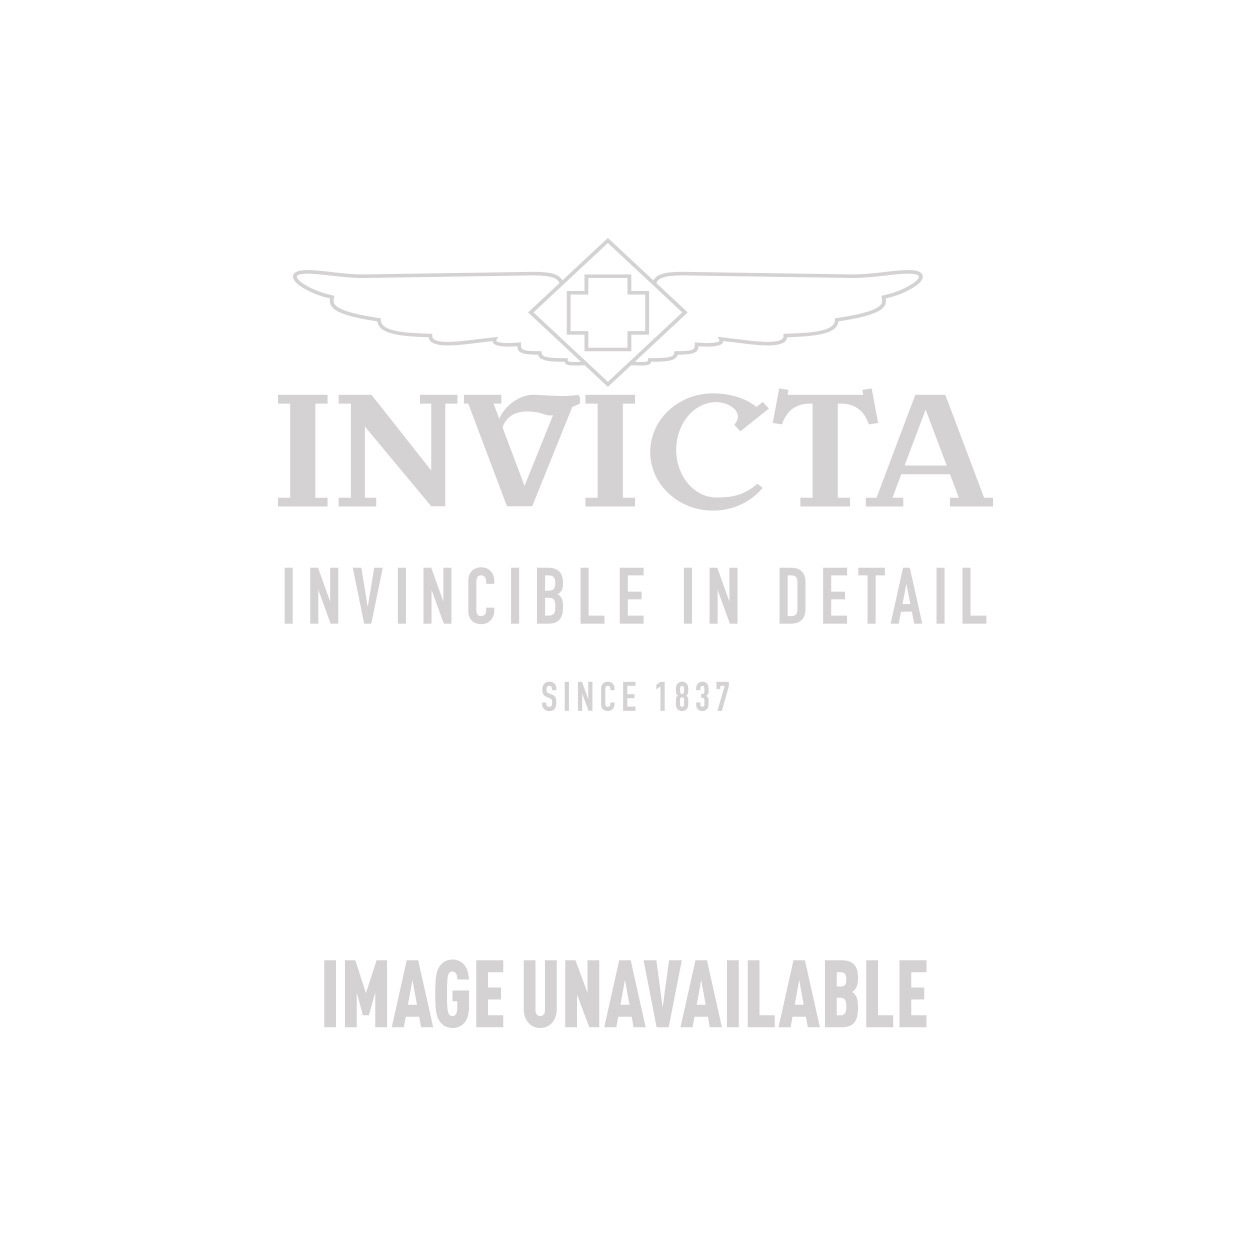 Invincible Guarantee - 100% Replacement Guarantee for Watches, Tier 12- 50-49